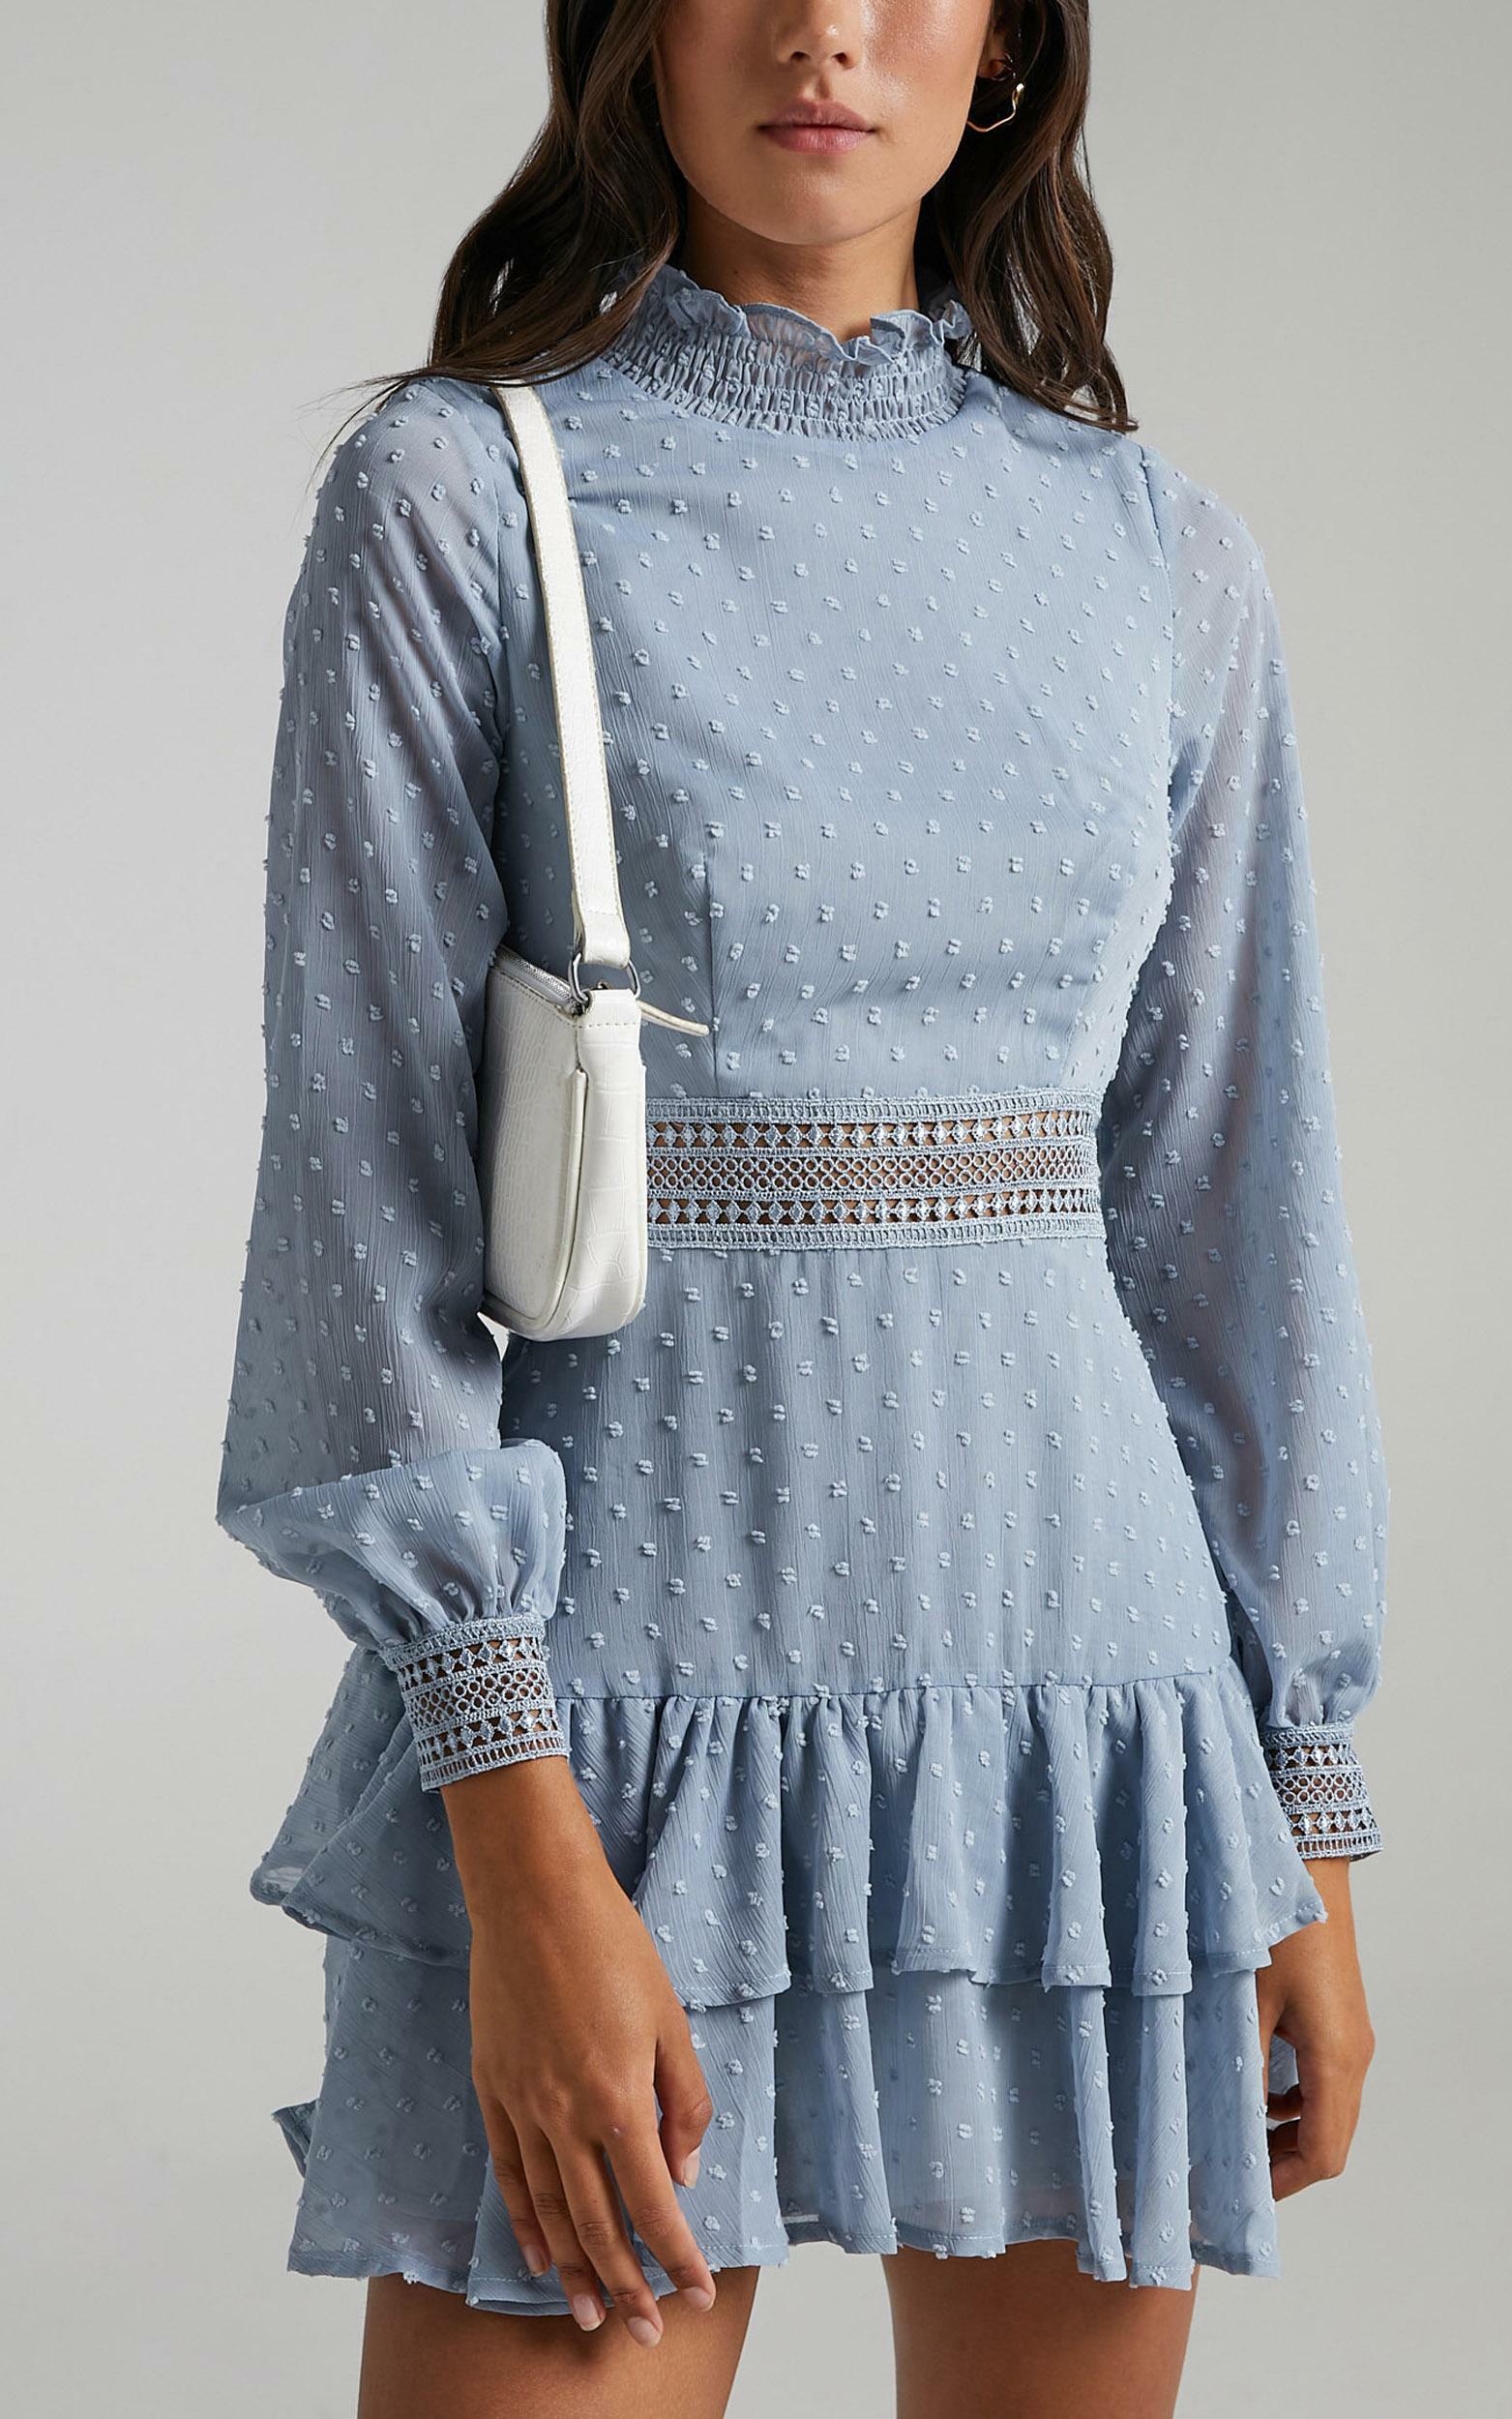 Are You Gonna Kiss Me Long Sleeve Mini Dress in Dusty Blue - 04, BLU2, hi-res image number null